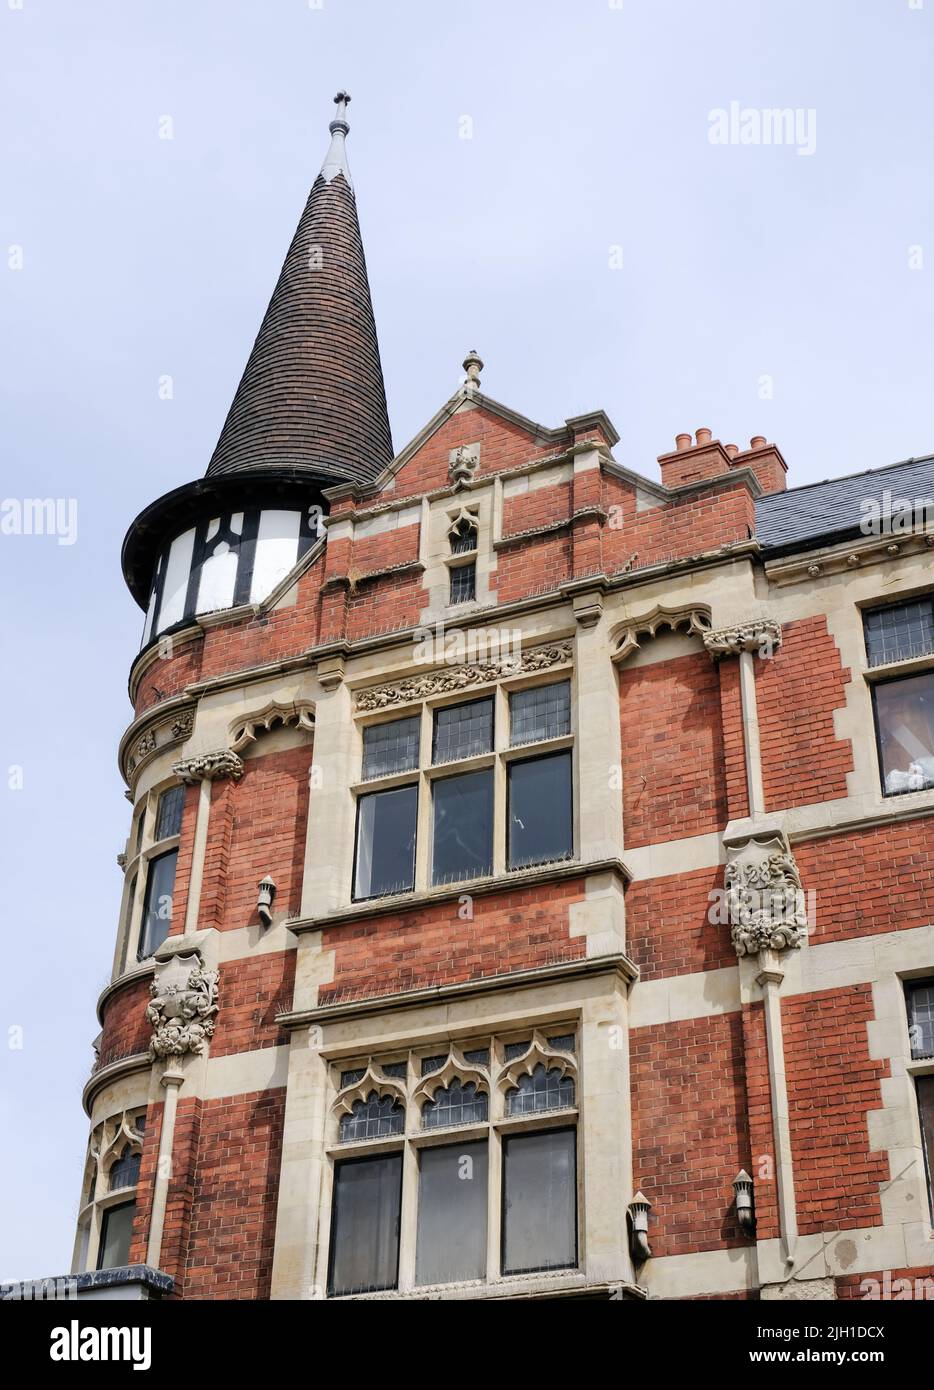 An elegant, red brick building with a turreted roof at the edge of Lincoln city centre, uk. Stock Photo